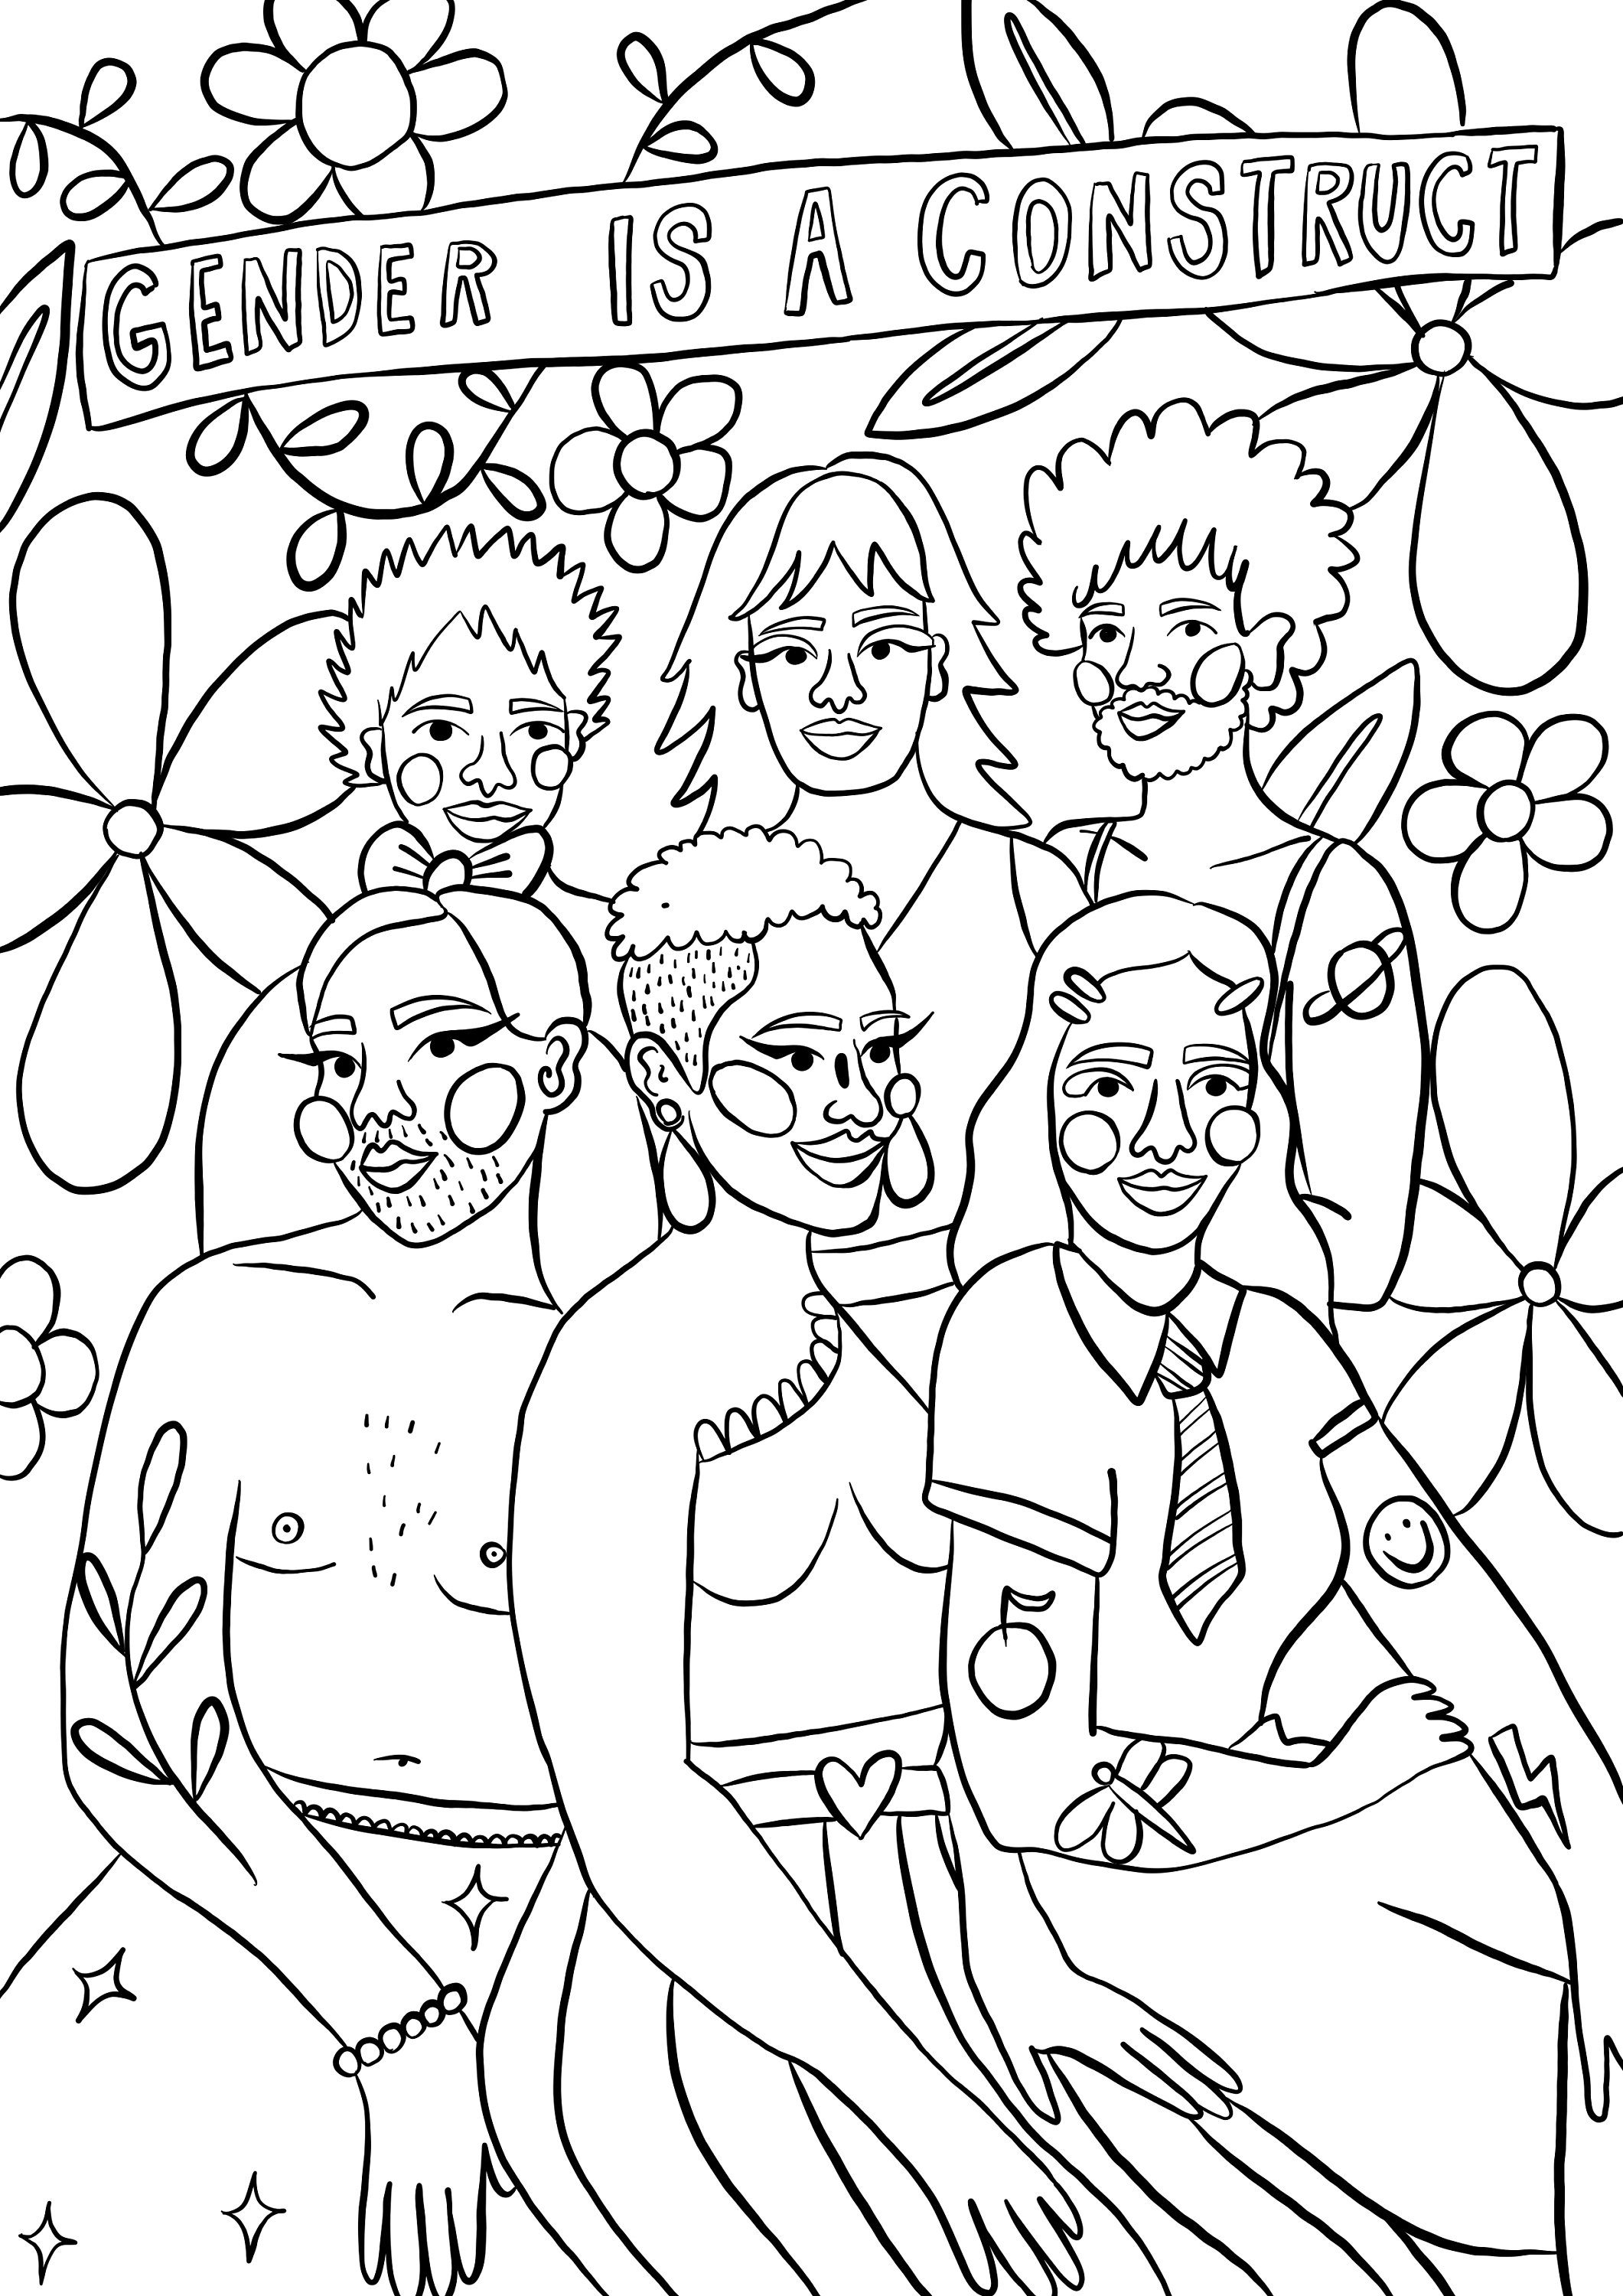 Gender is a Construct LGBT Colouring Sheet Digital Download - Etsy